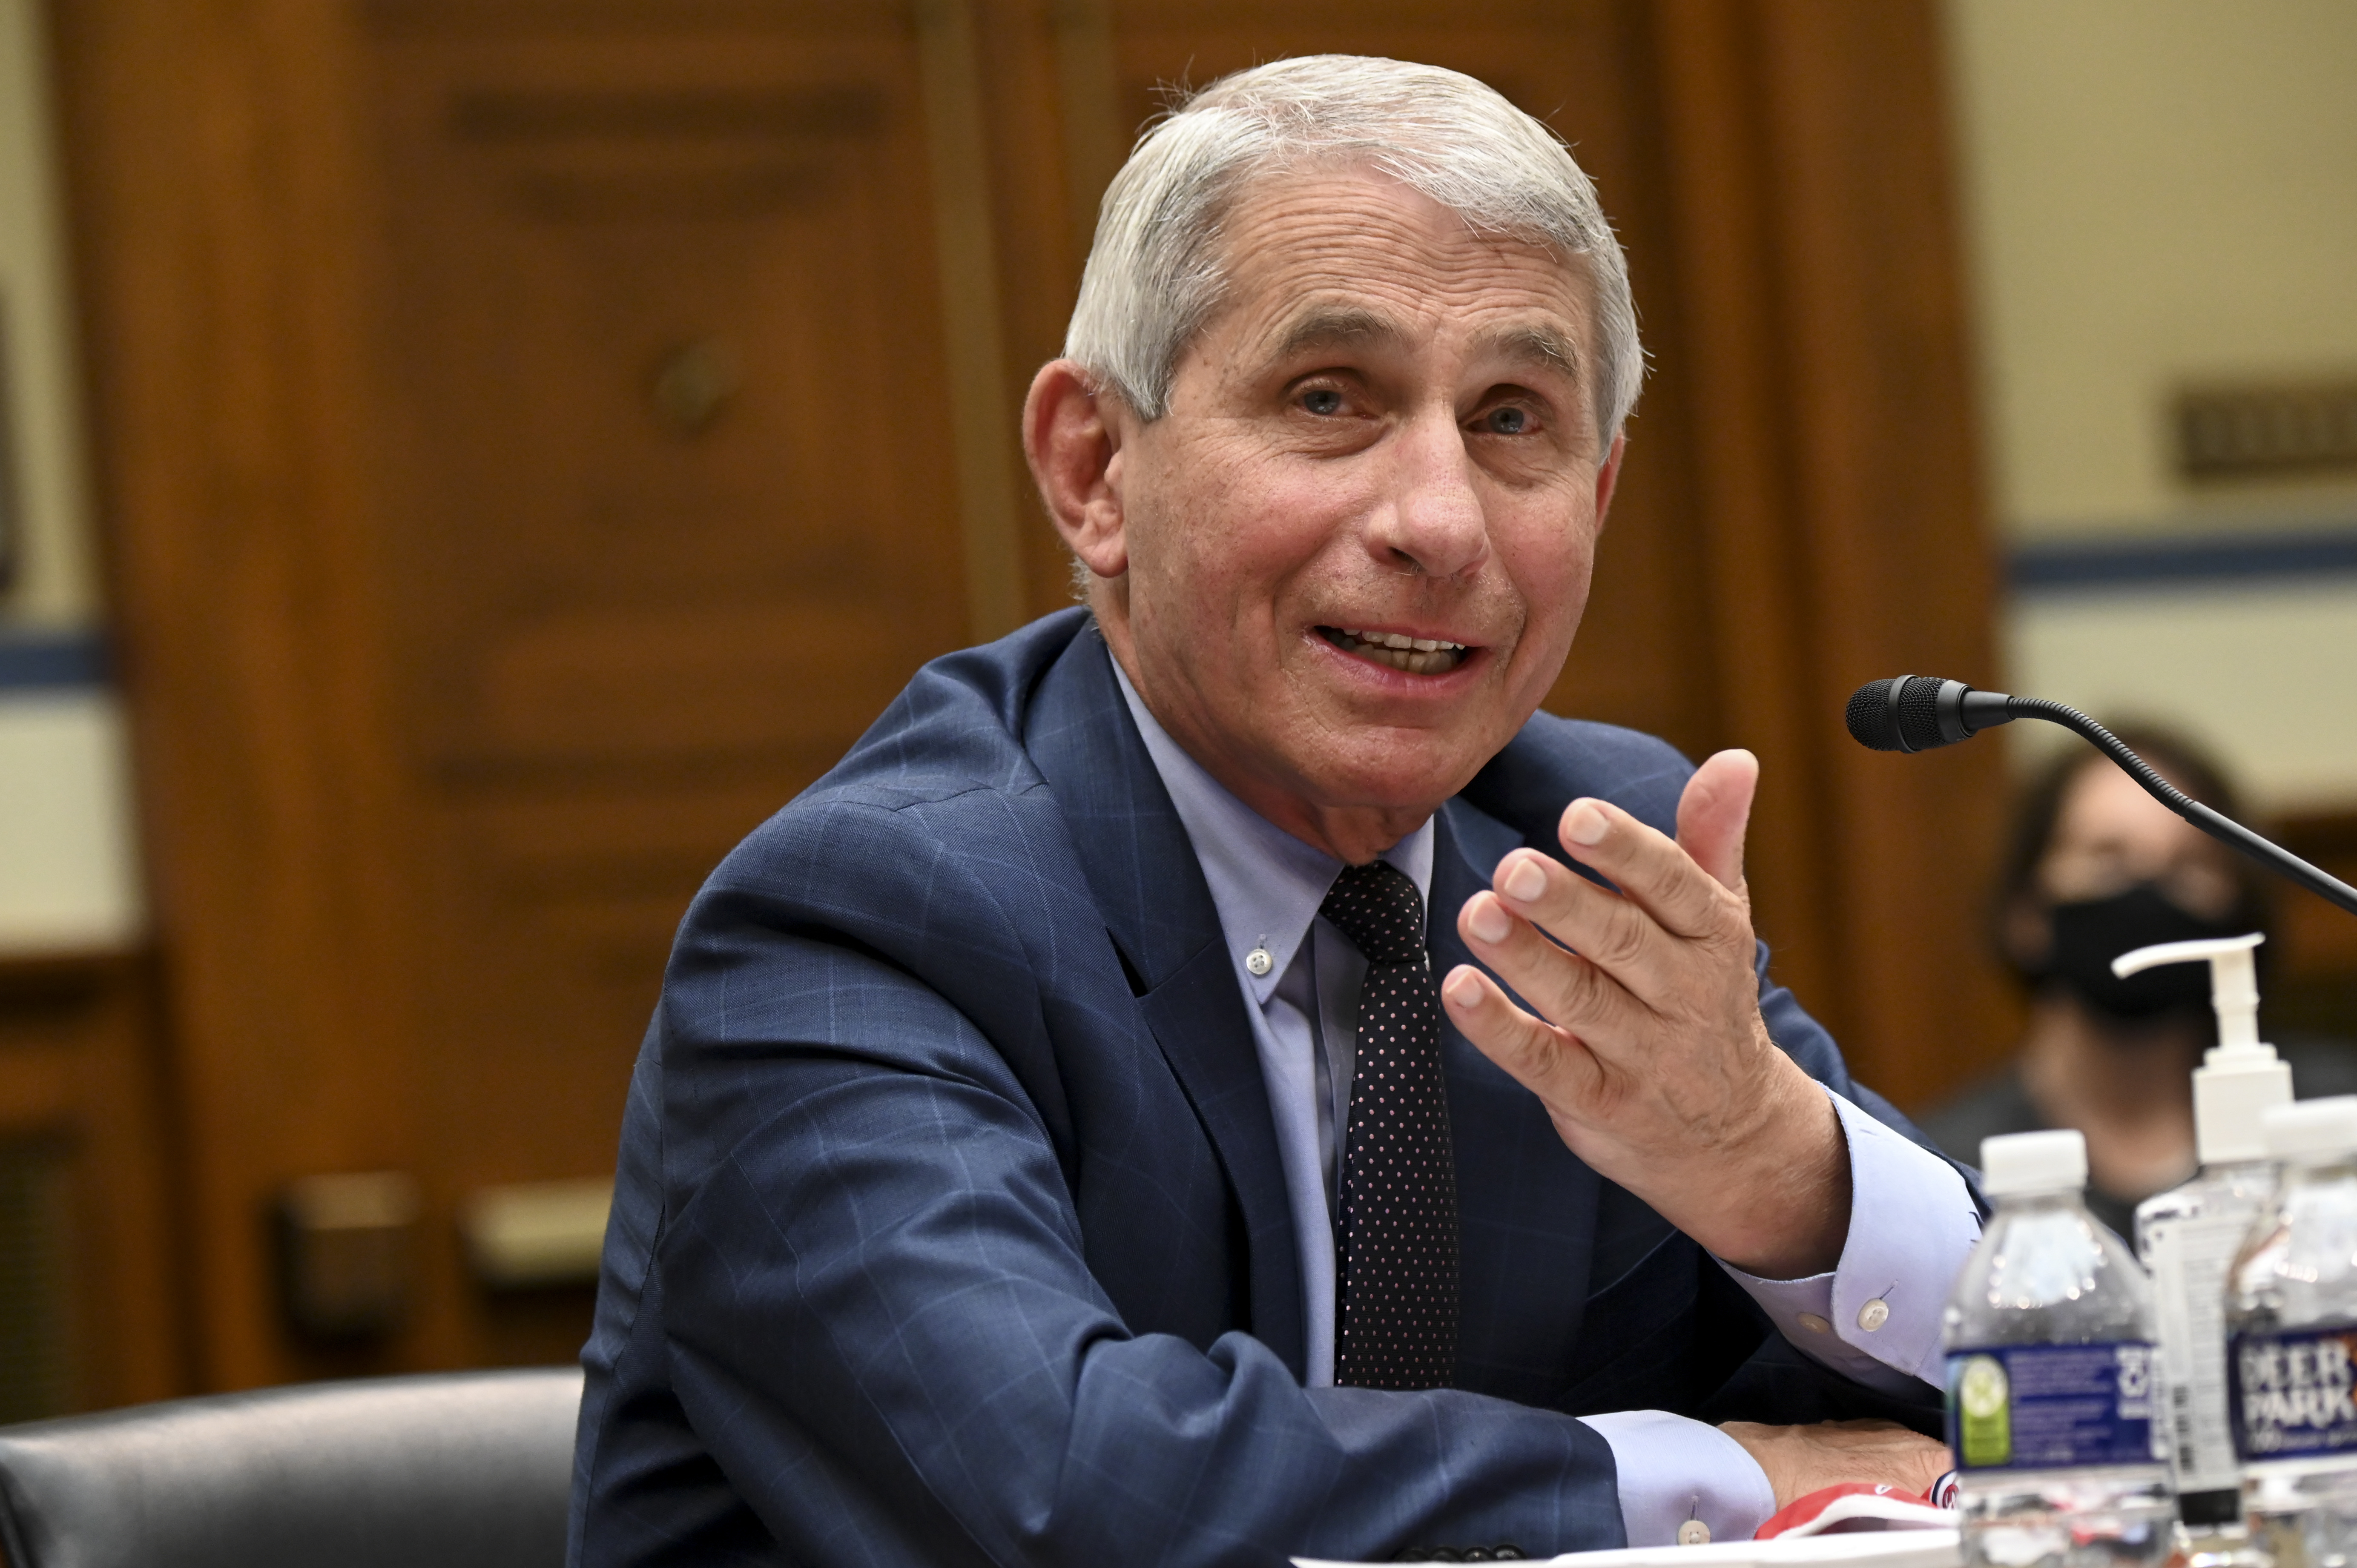 Dr. Anthony Fauci, director of the National Institute of Allergy and Infectious Diseases, testifies during a House Select Subcommittee on the coronavirus crisis hearing on July 31, 2020 in Washington, DC.